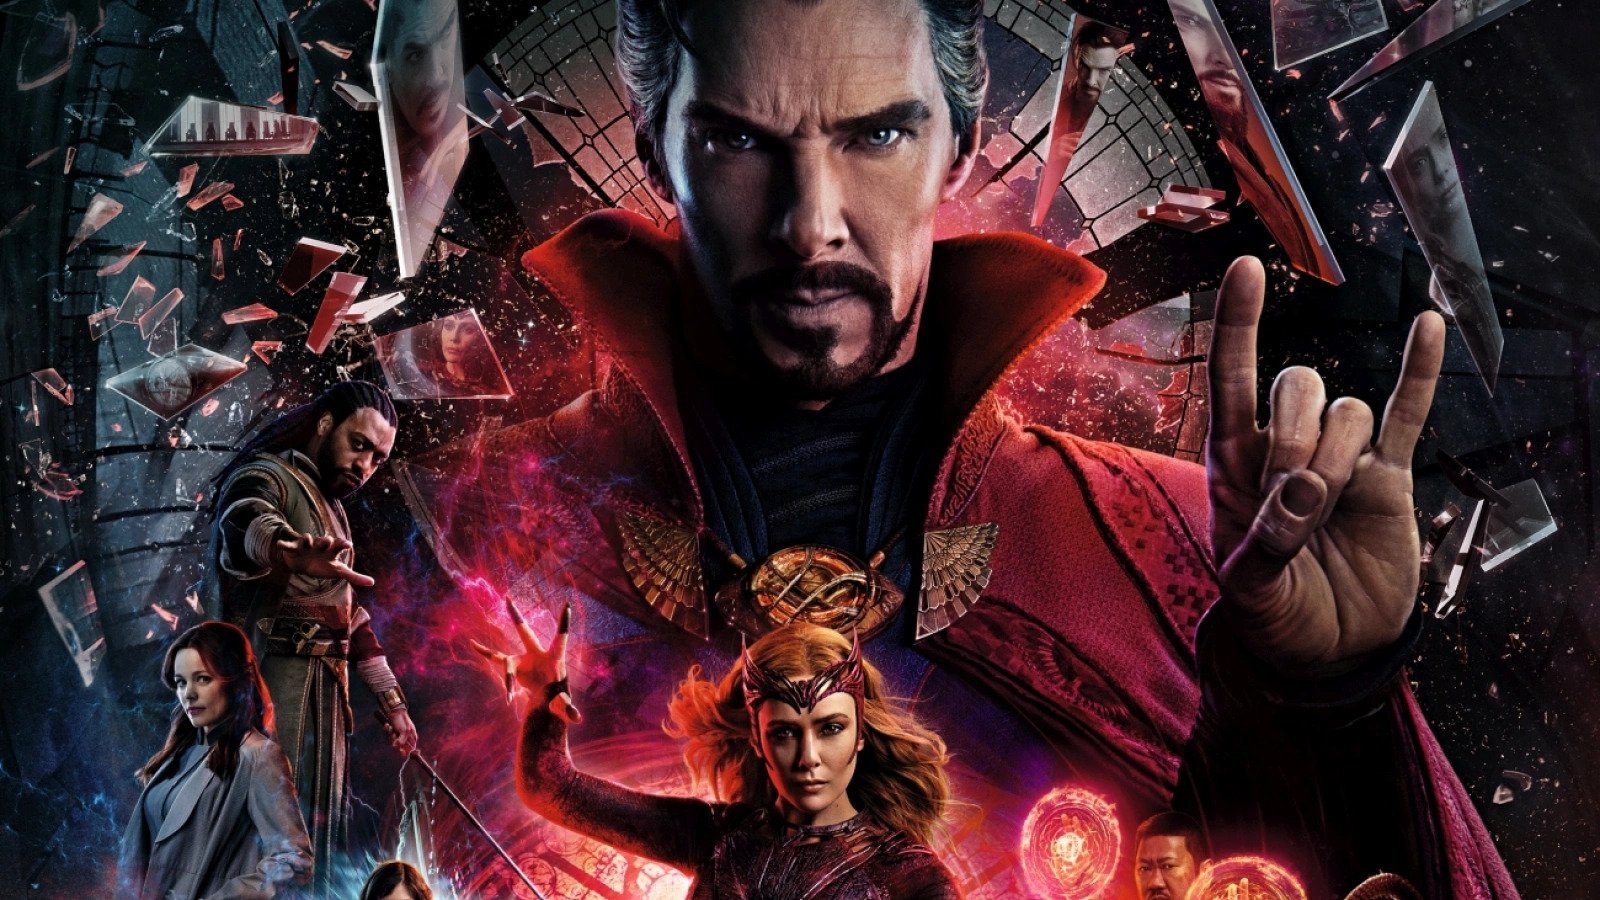 Watch Doctor Strange In The Multiverse of Madness On Disney+ 22 June & Win